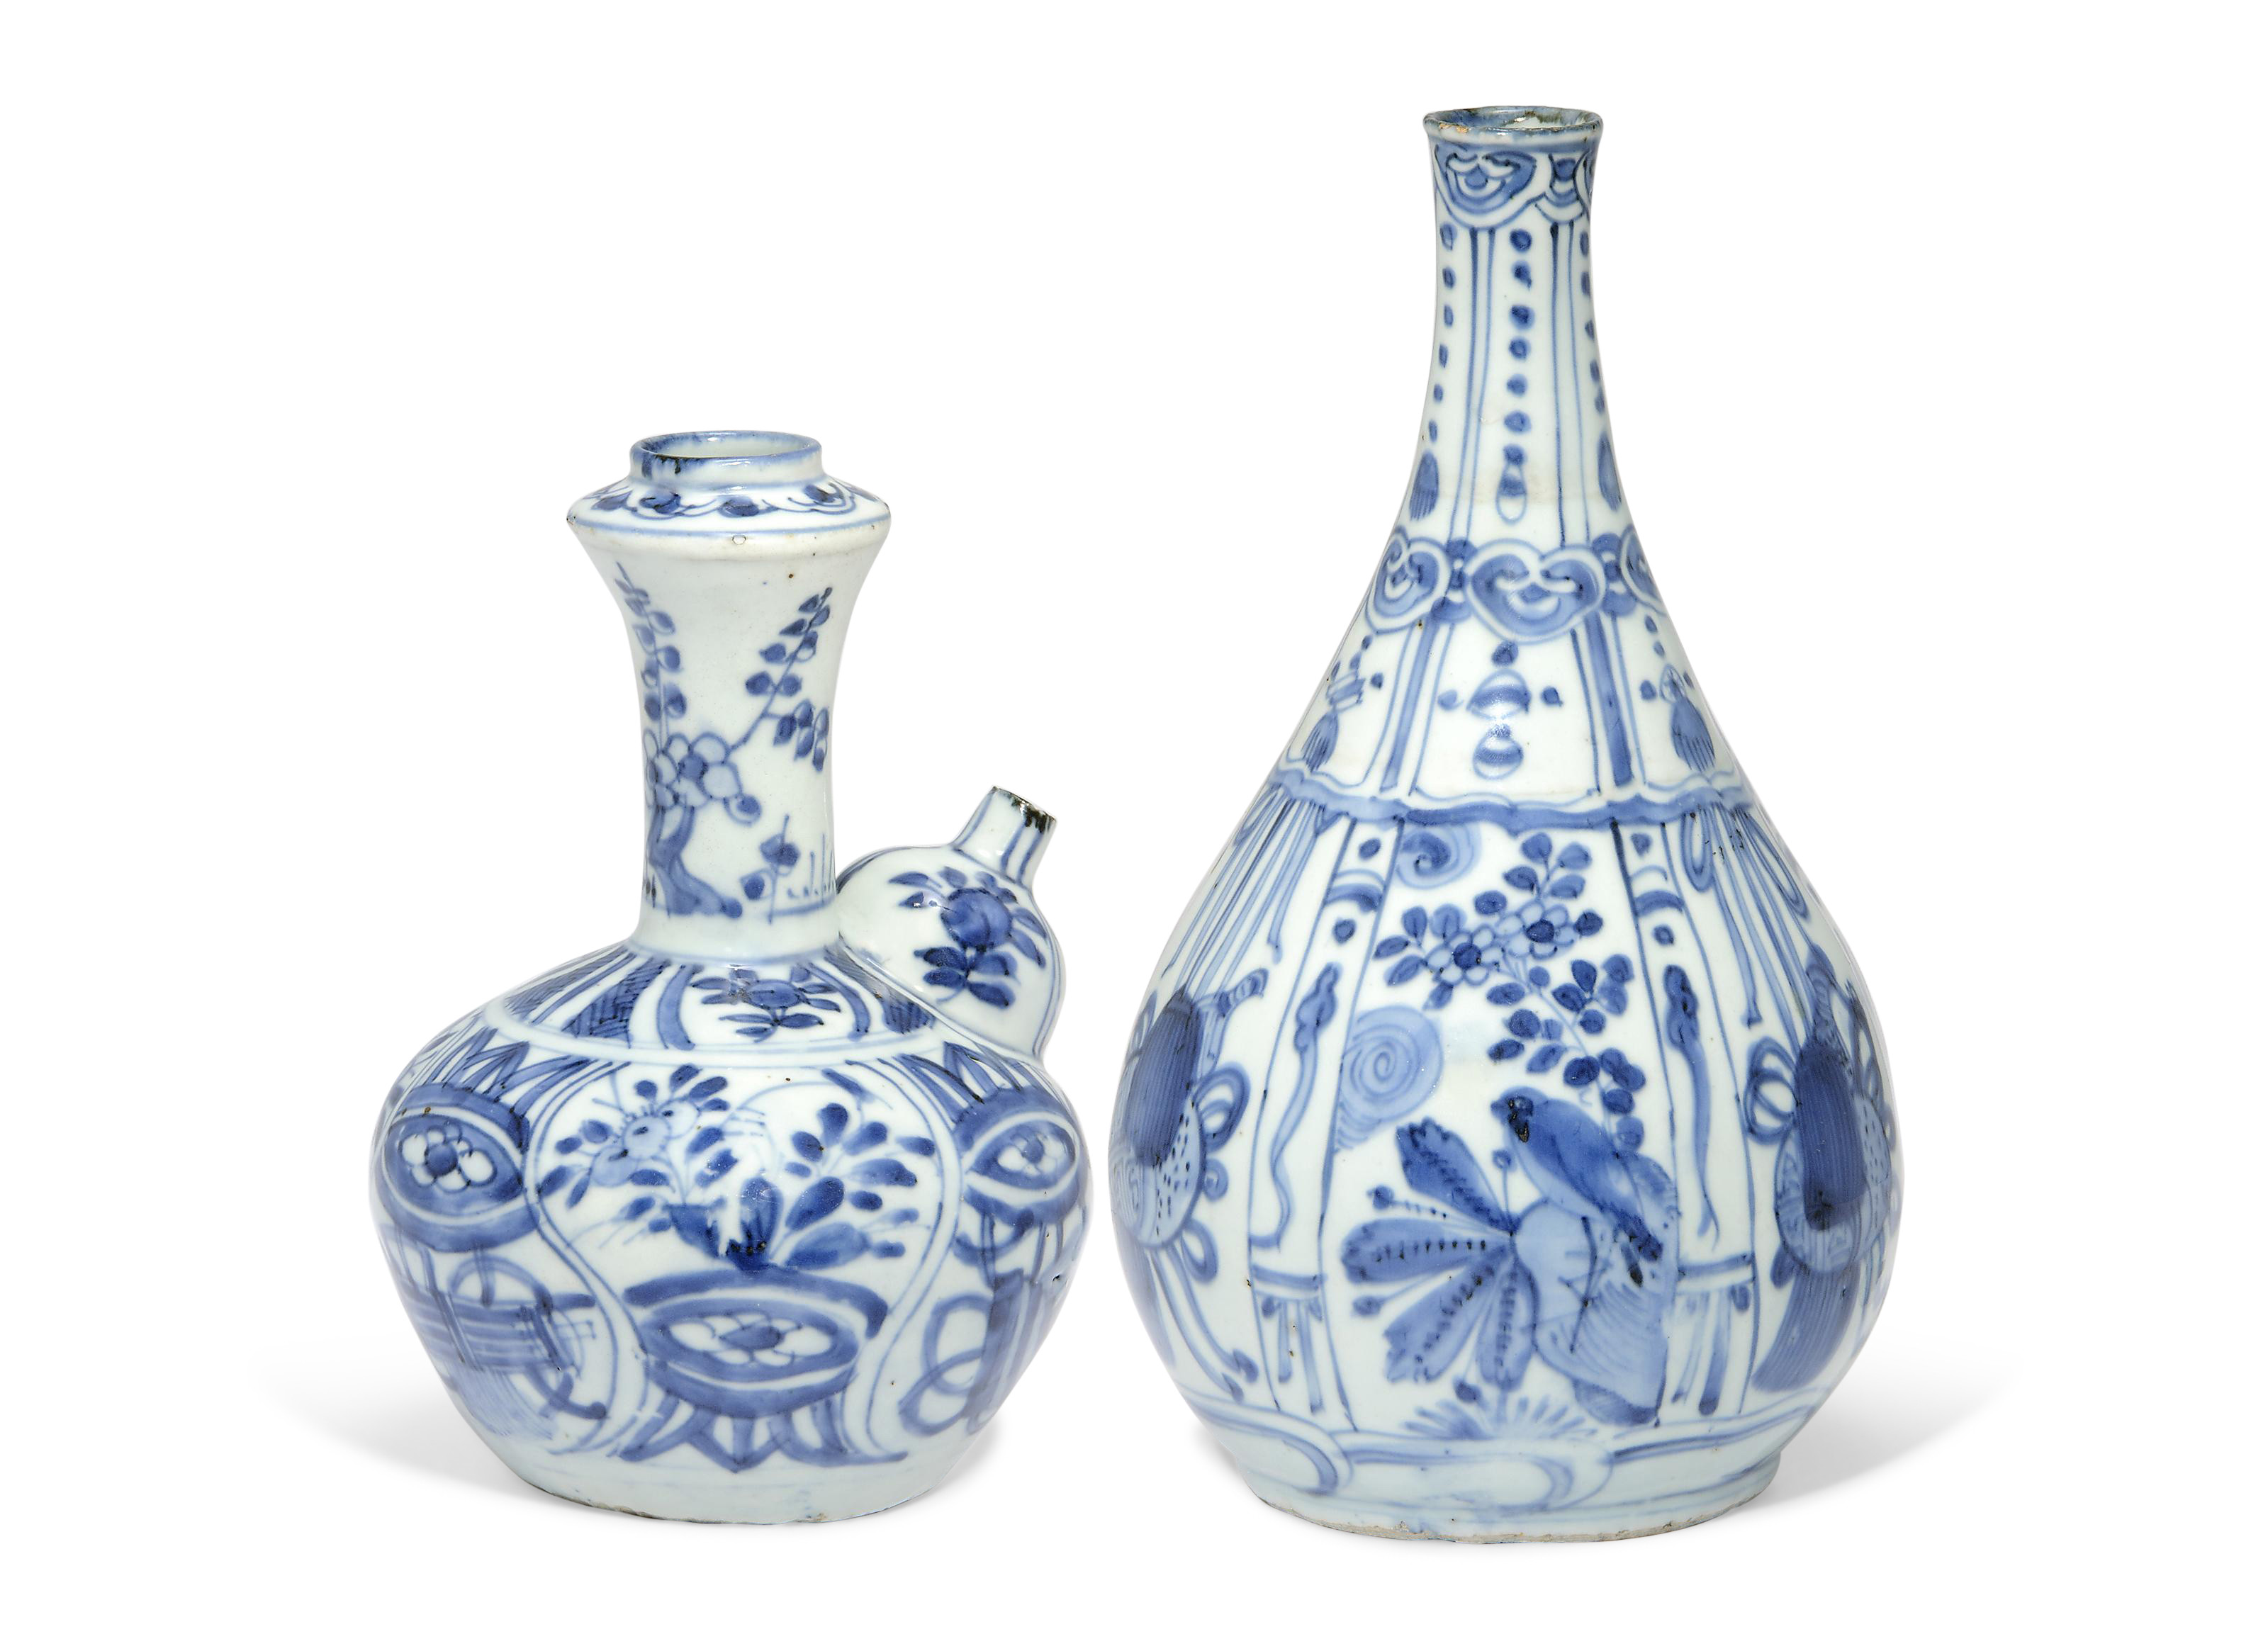 17 Stylish Light Blue and White Vase 2024 free download light blue and white vase of a blue and white kendi and a bottle vase wanli period 1573 1619 with regard to a blue and white kendi and a bottle vase wanli period 1573 1619 christies